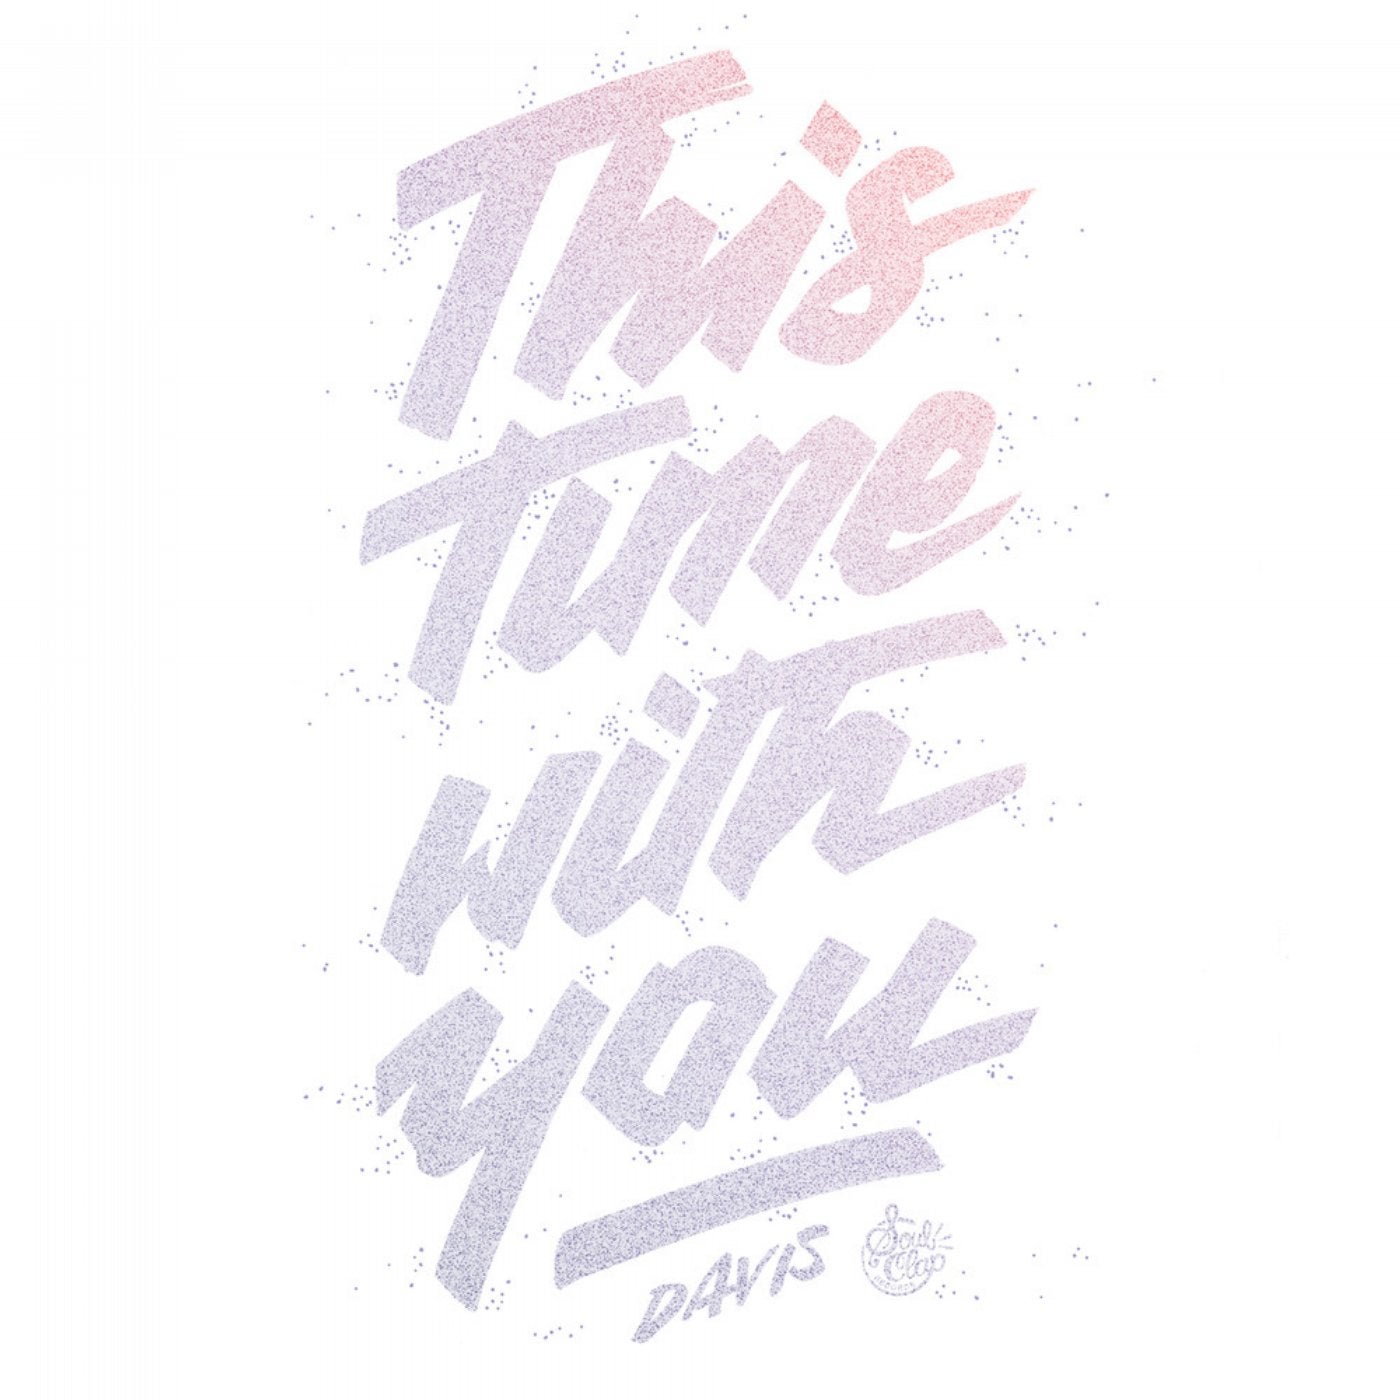 This Time with You - EP